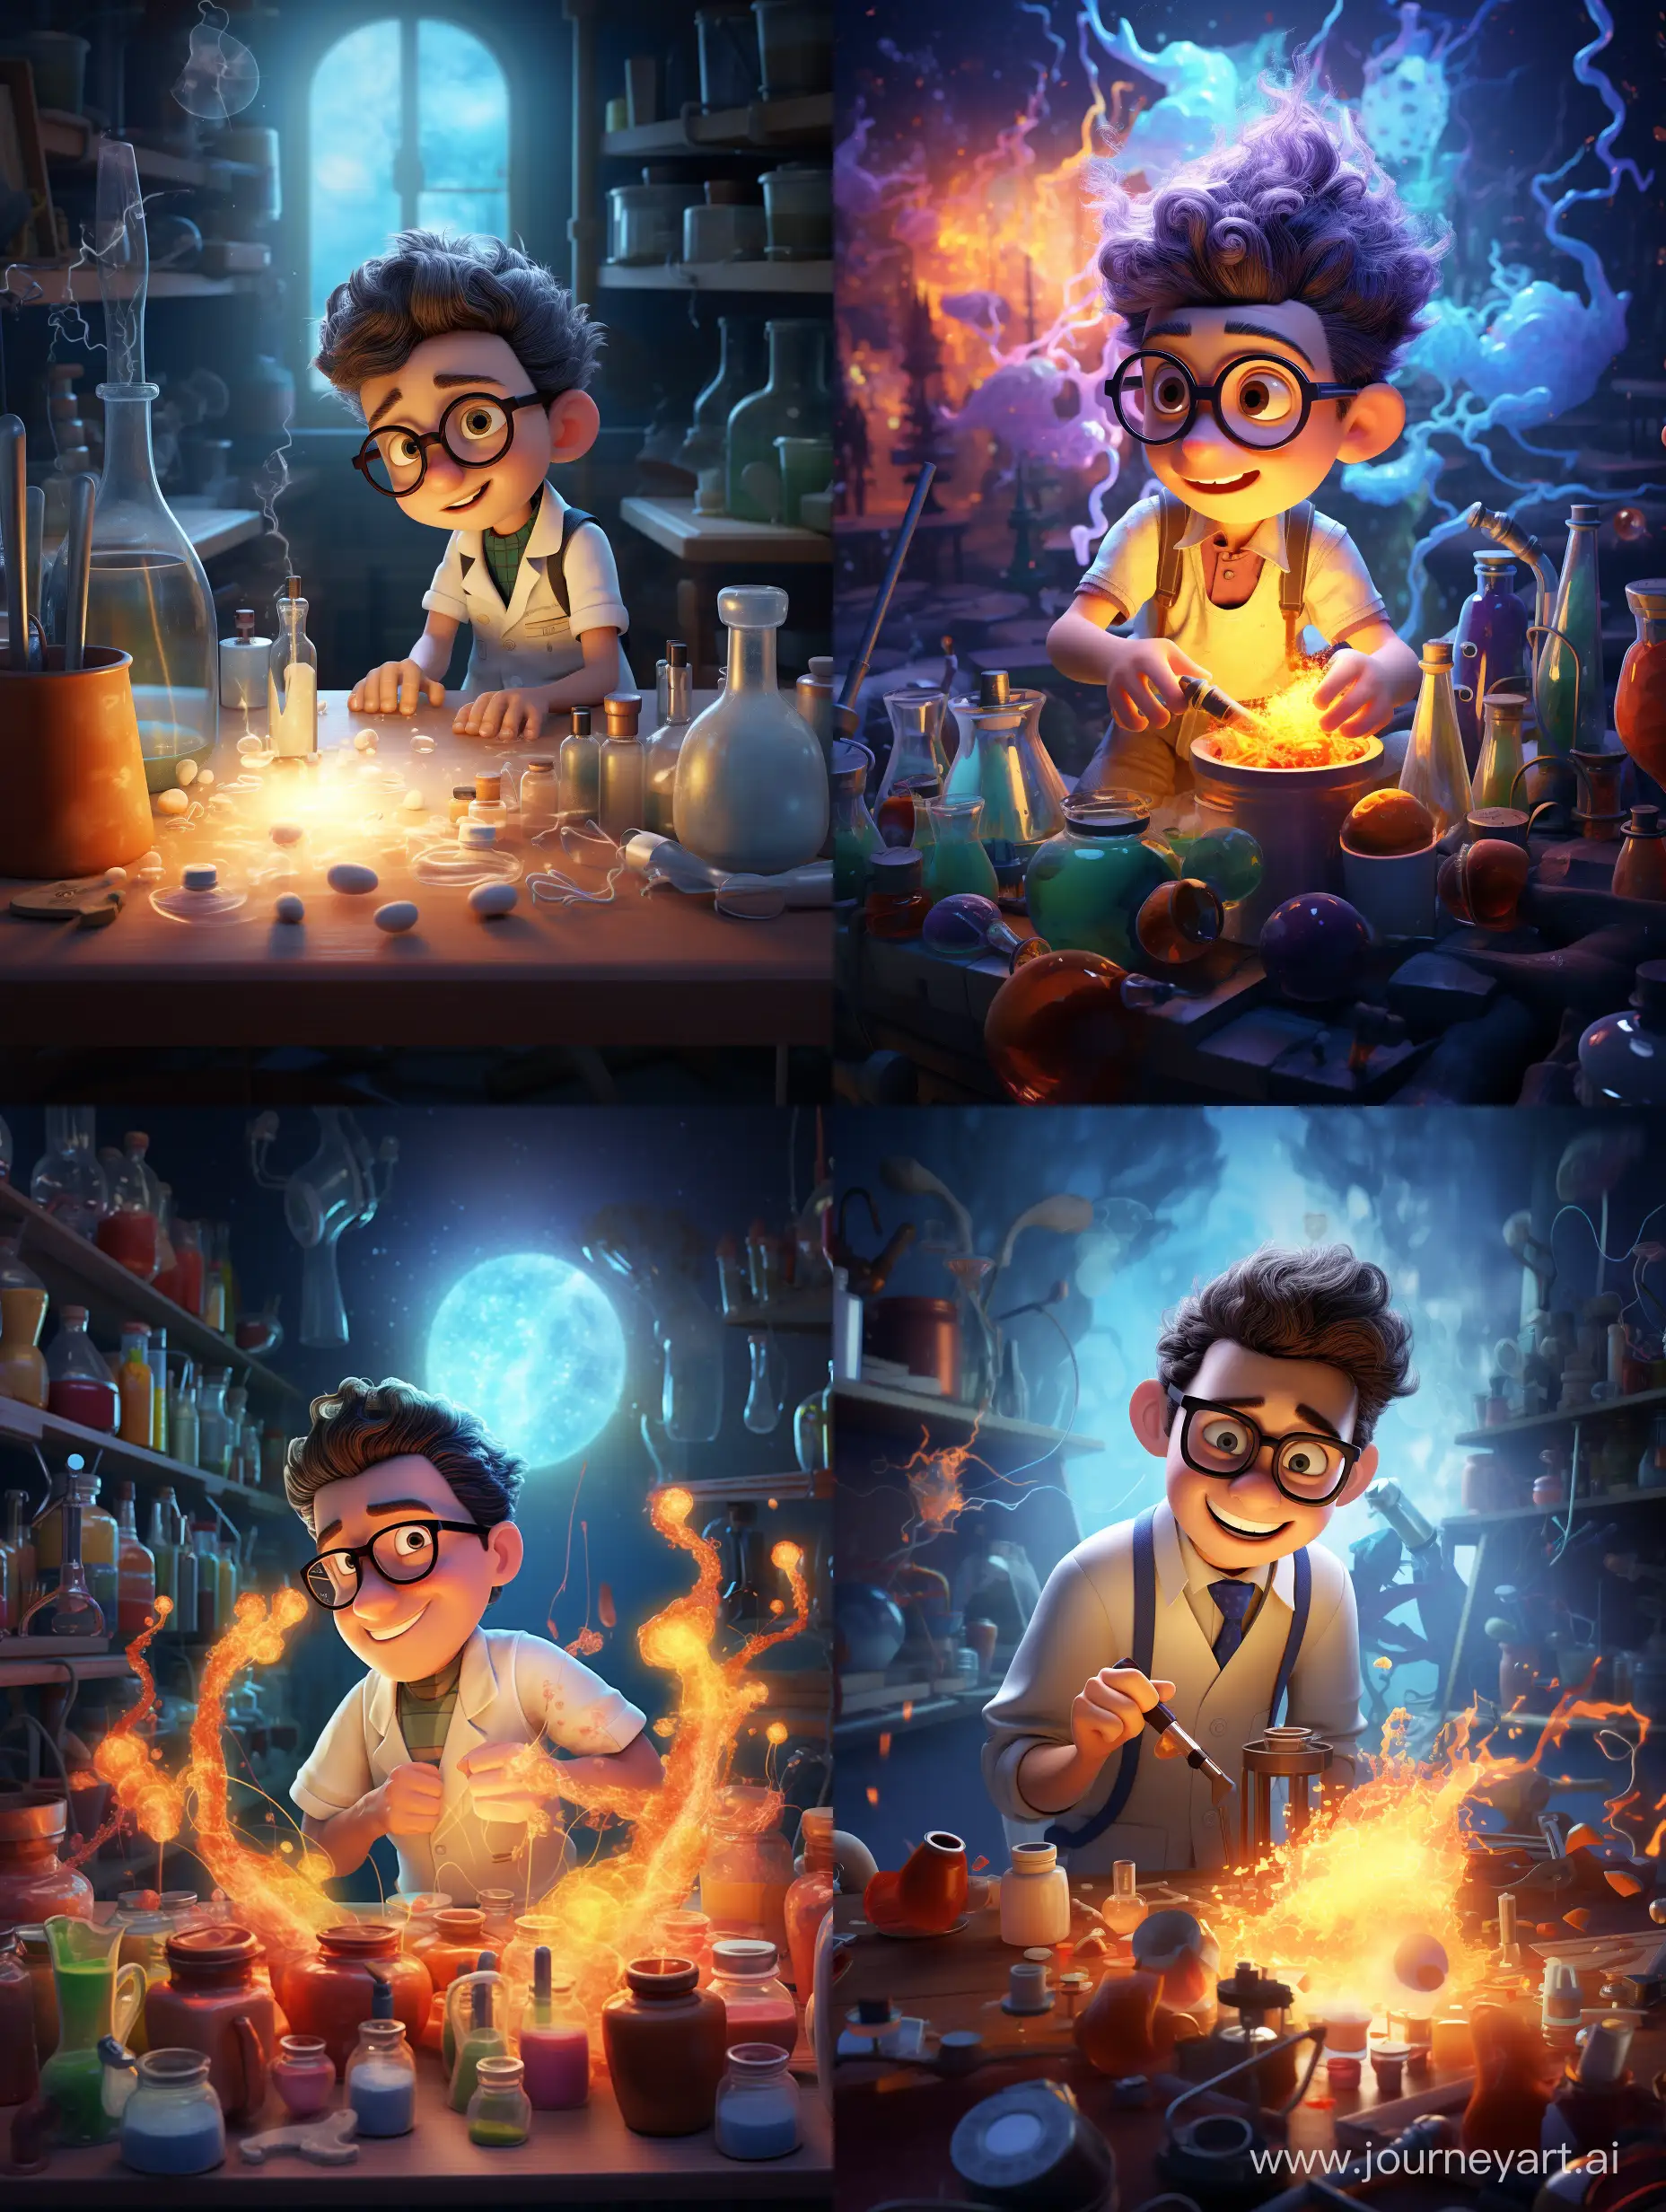 The scientist mixed the chemicals. Pixar style